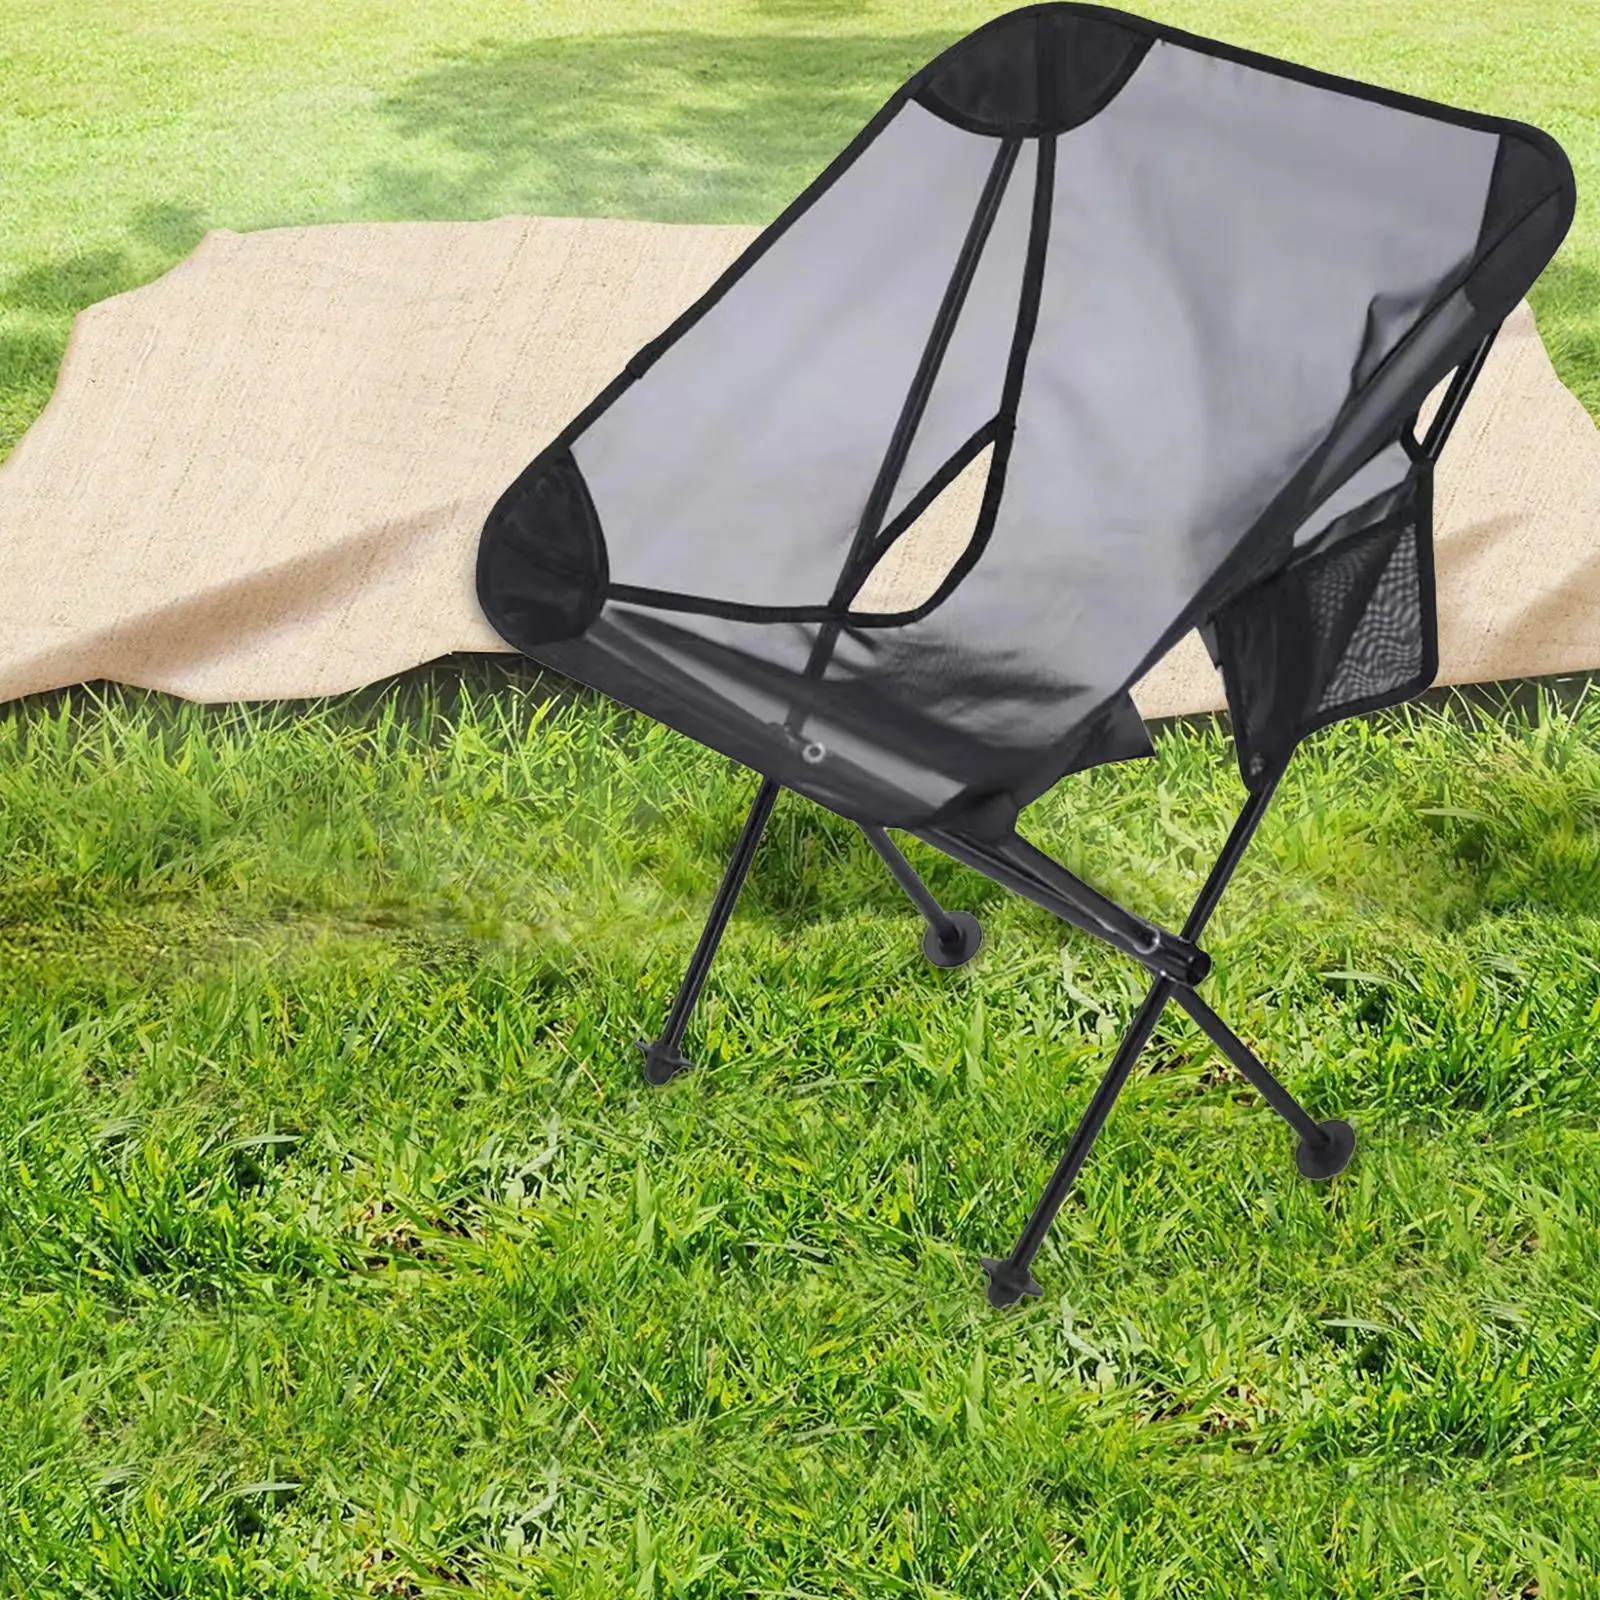 Folding Camping Chair Outdoor Moon Chair Outdoor Concerts Durable Portable with Side Pockets Gardens Campings Folding Chair